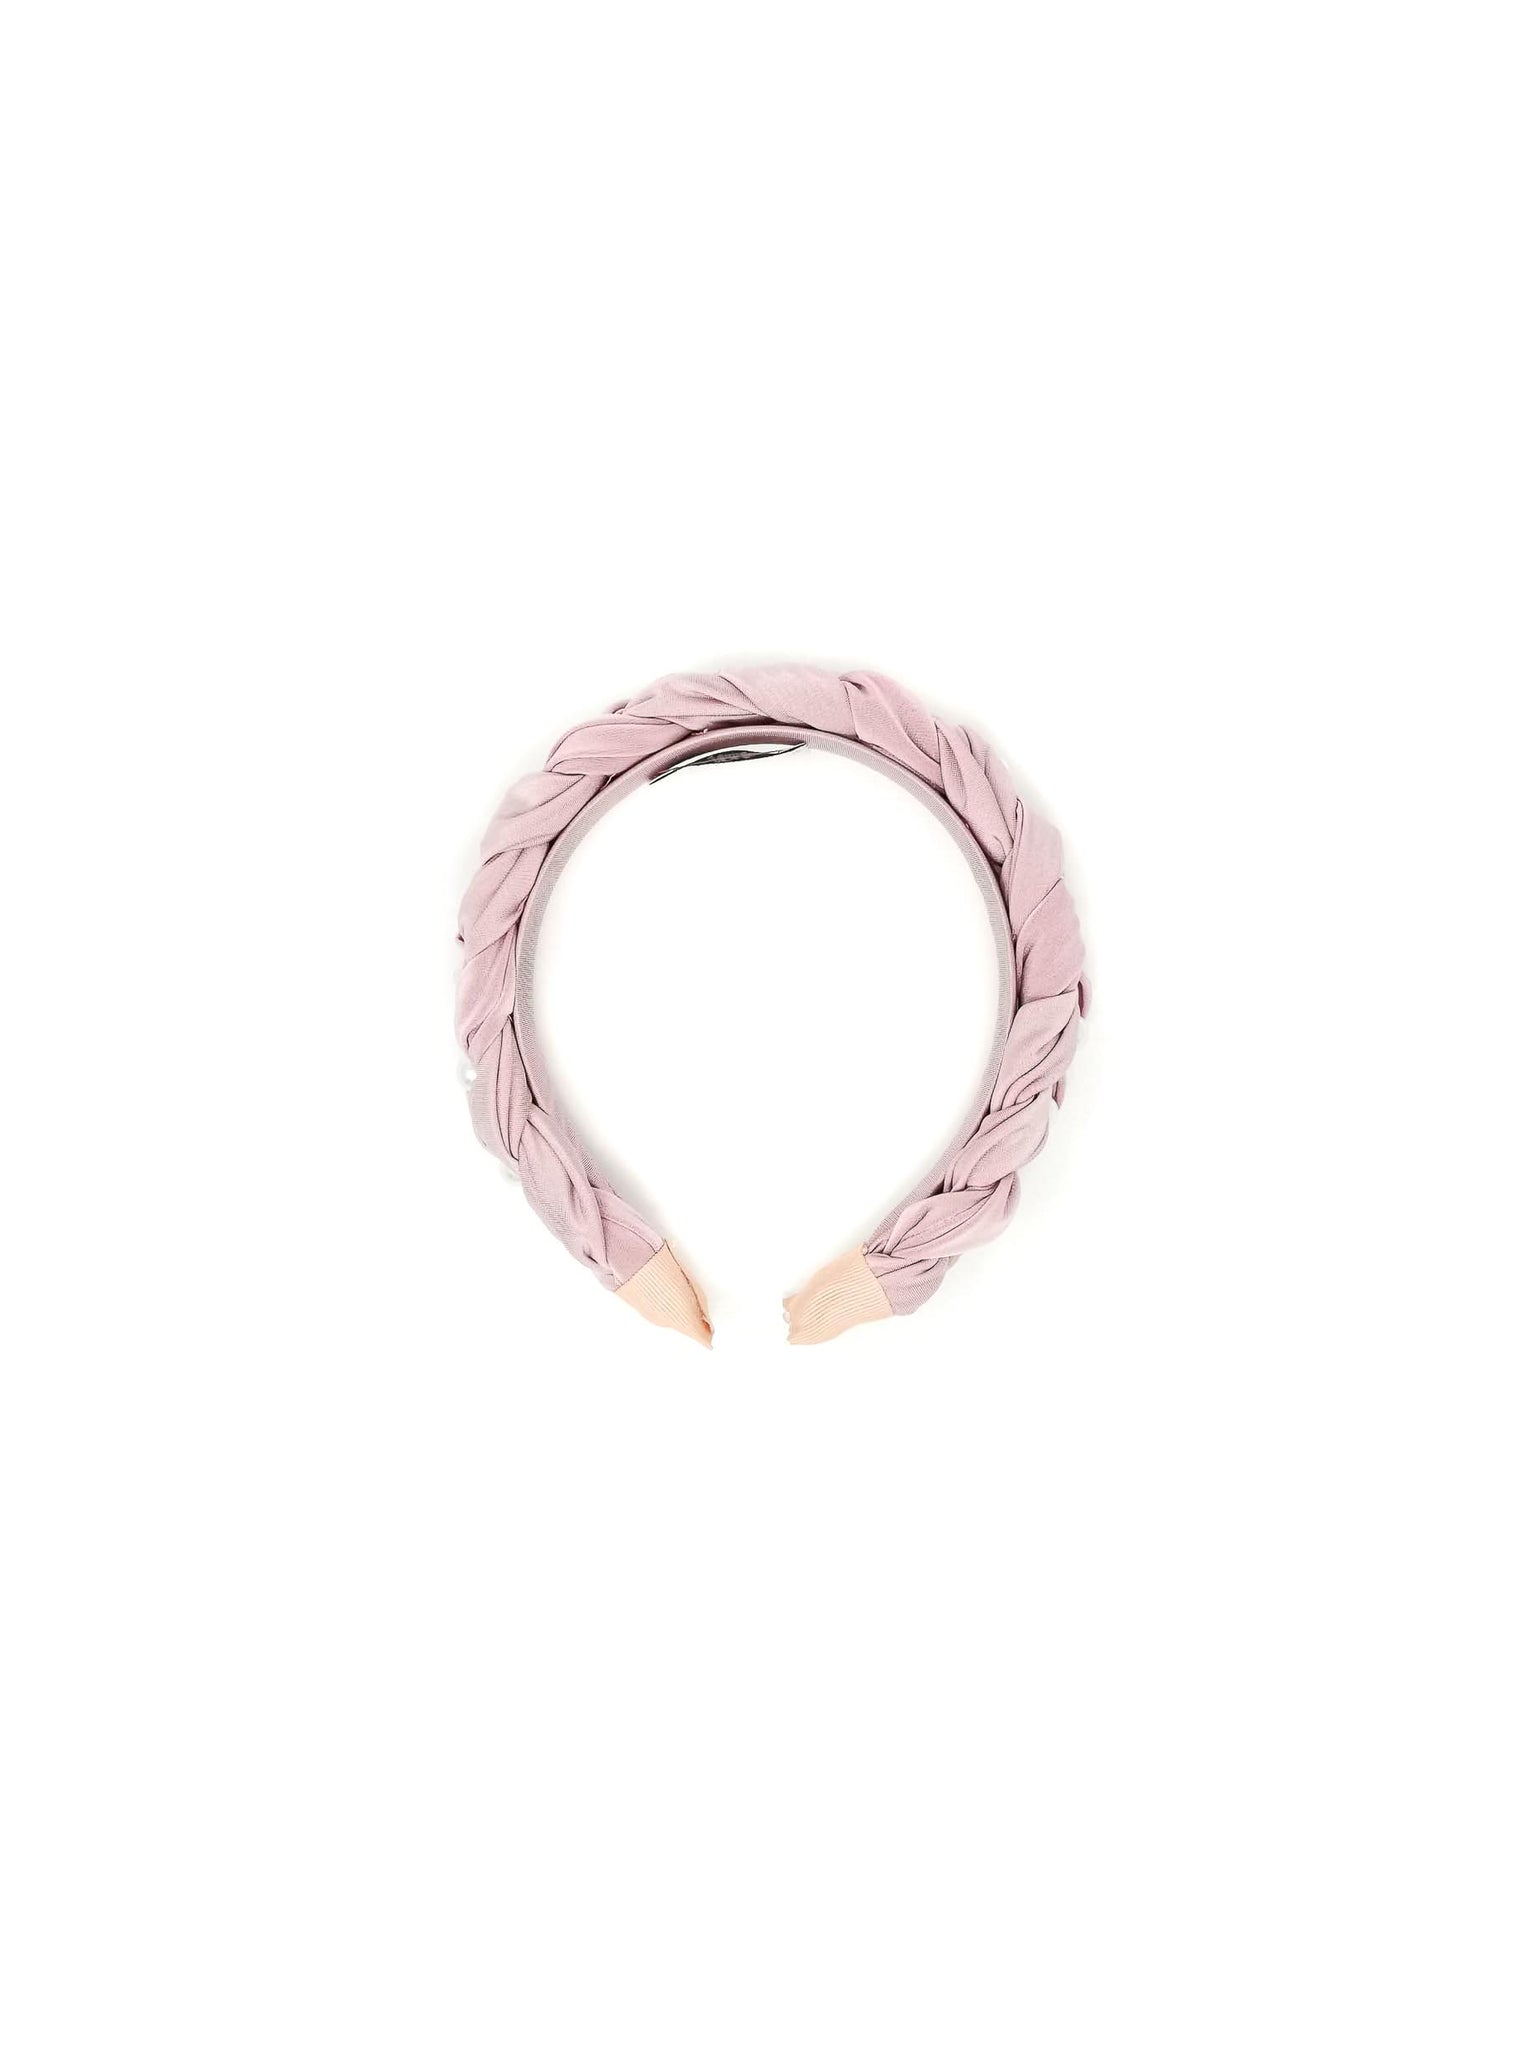 "Frida" pink jersey braided hairband with pearls